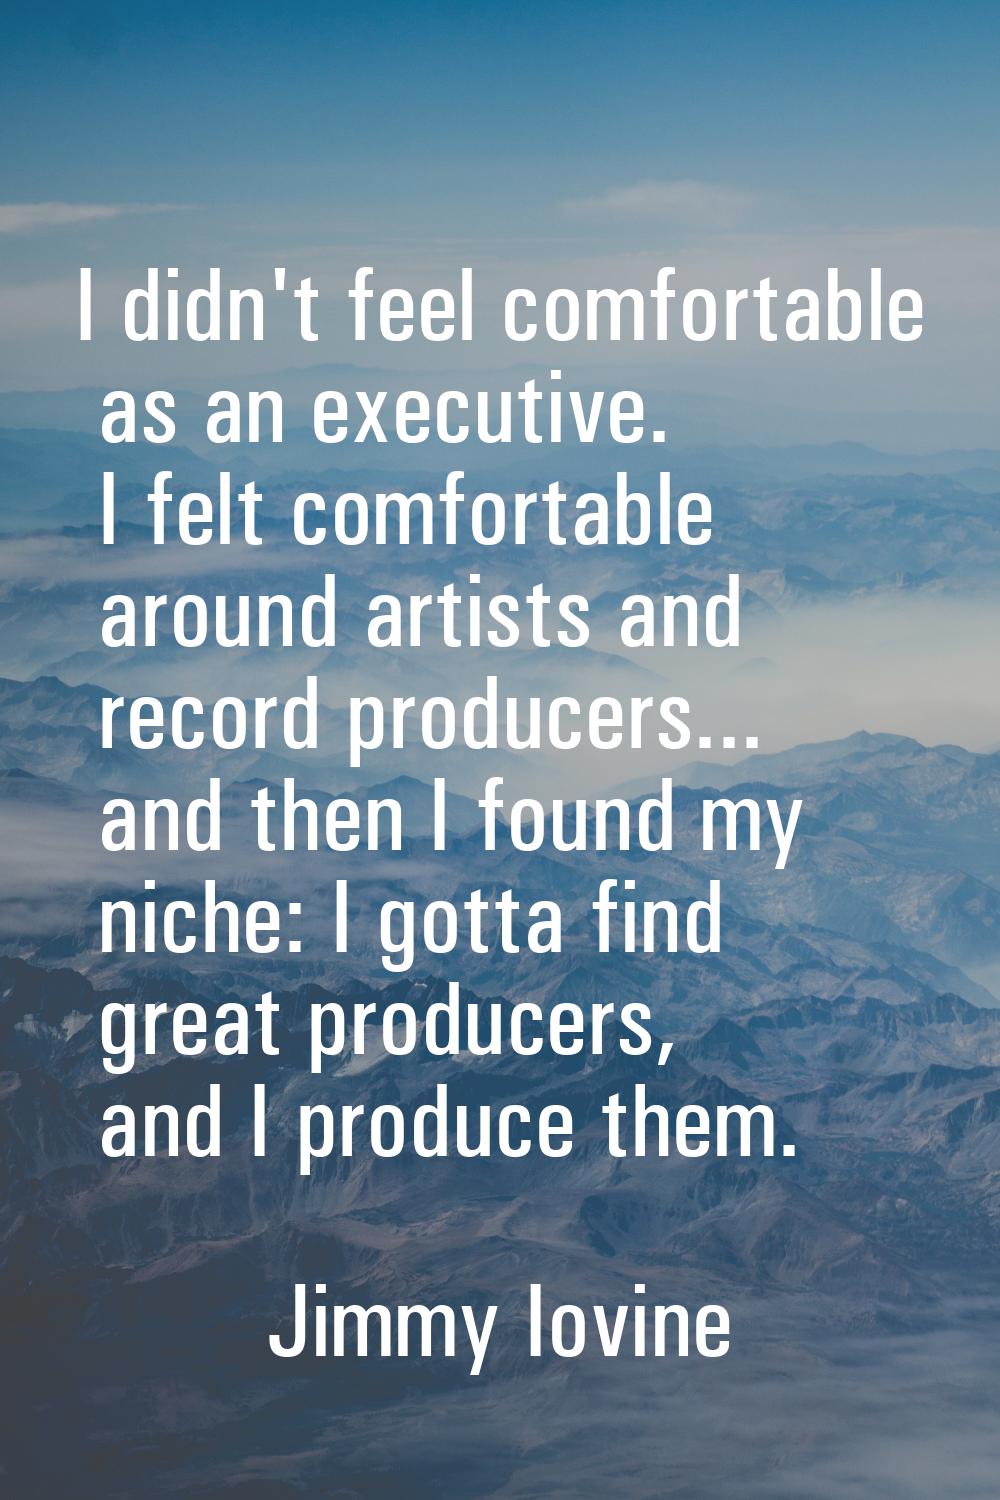 I didn't feel comfortable as an executive. I felt comfortable around artists and record producers..